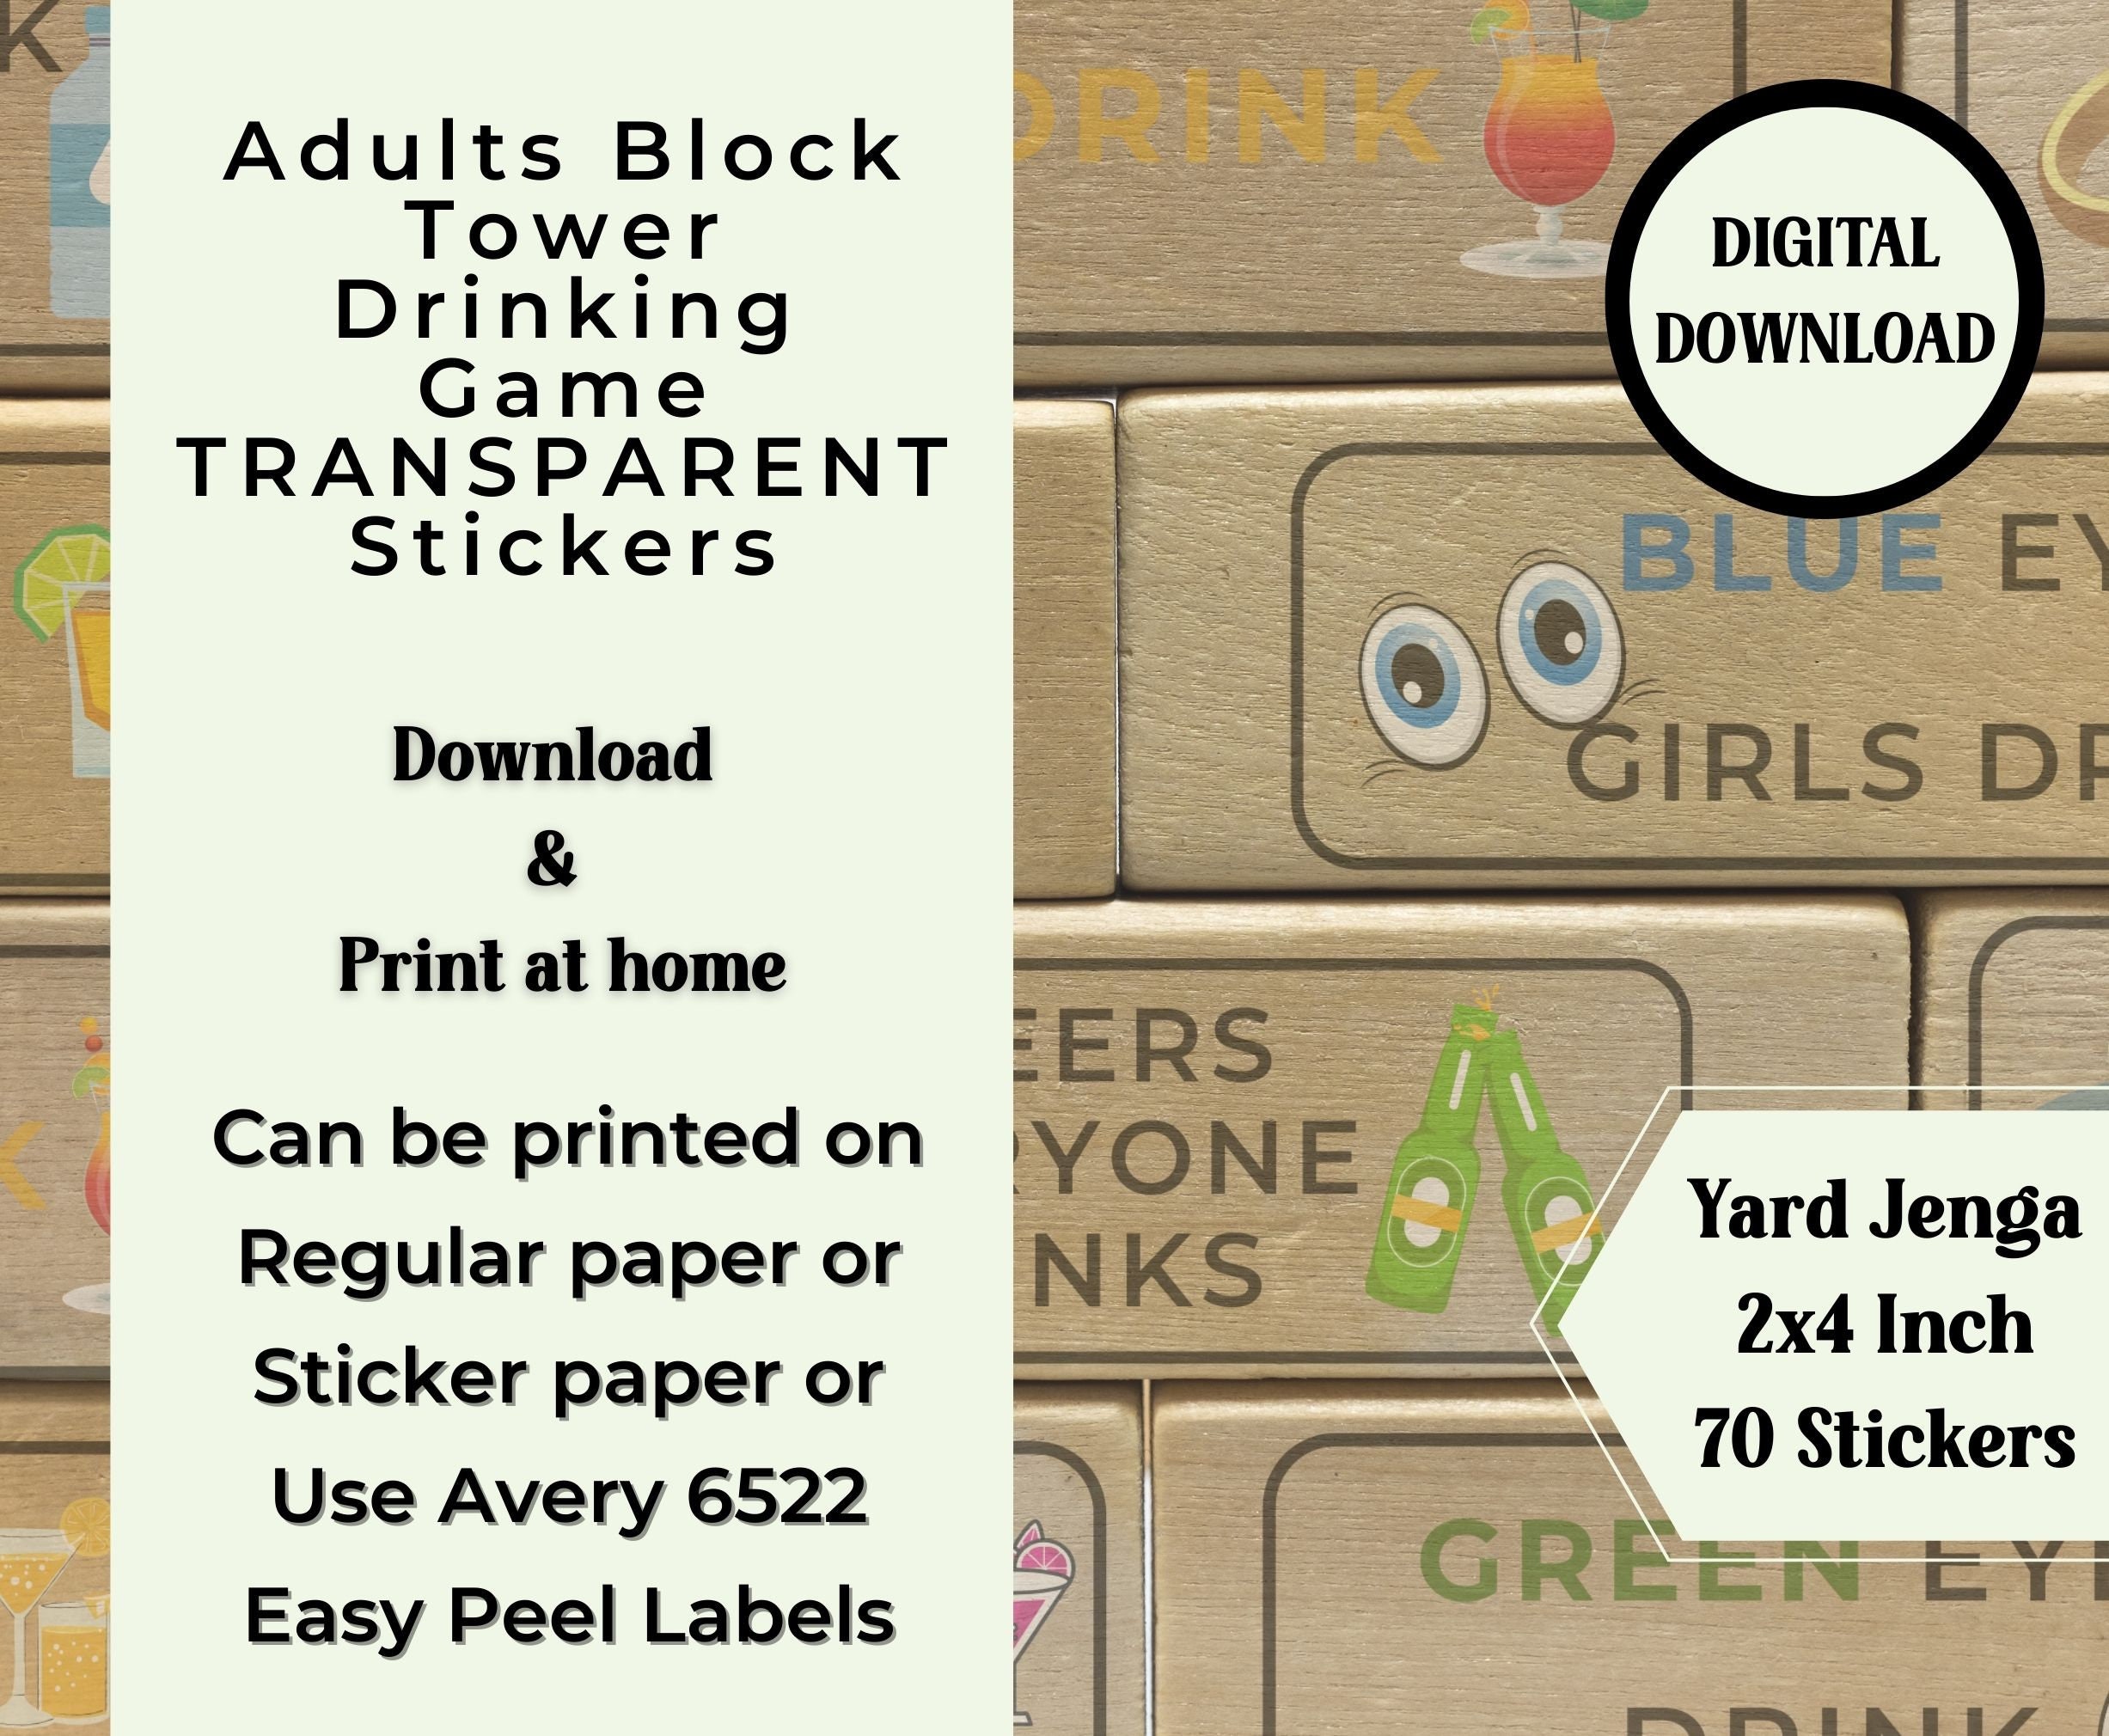 Adult Jenga 70 Stickers, Drinking Jenga Game Outdoor Large 2x4 Inch  Stickers, Transparent Background Instant Download Adult Block Tower Game 